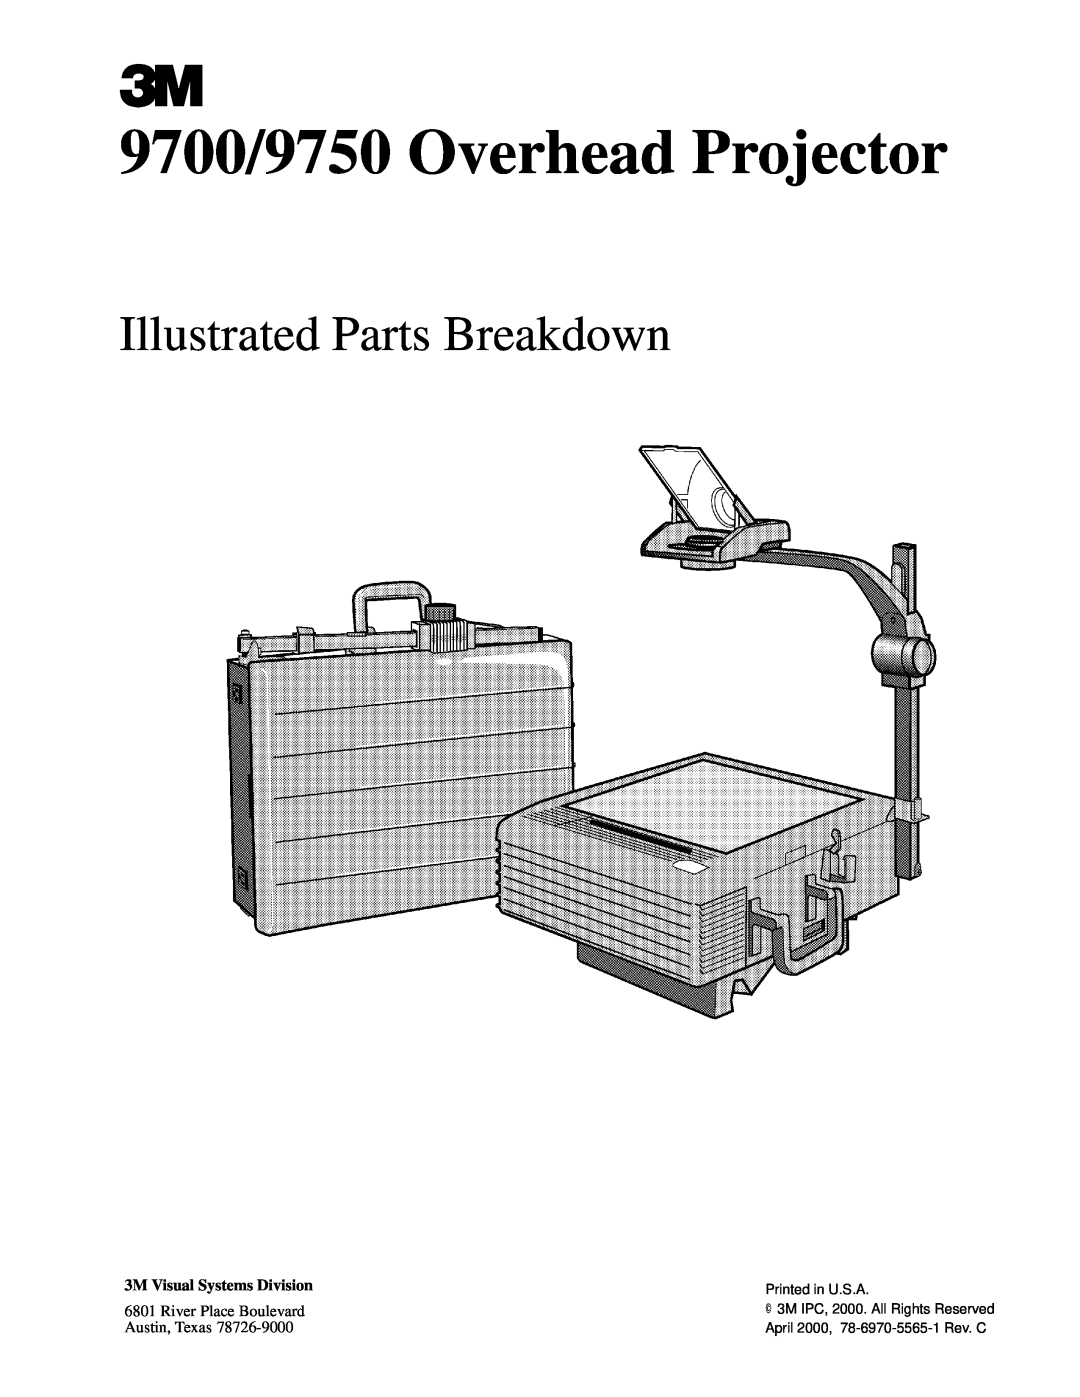 3M manual 9700/9750 Overhead Projector, Illustrated Parts Breakdown, 3M Visual Systems Division, River Place Boulevard 